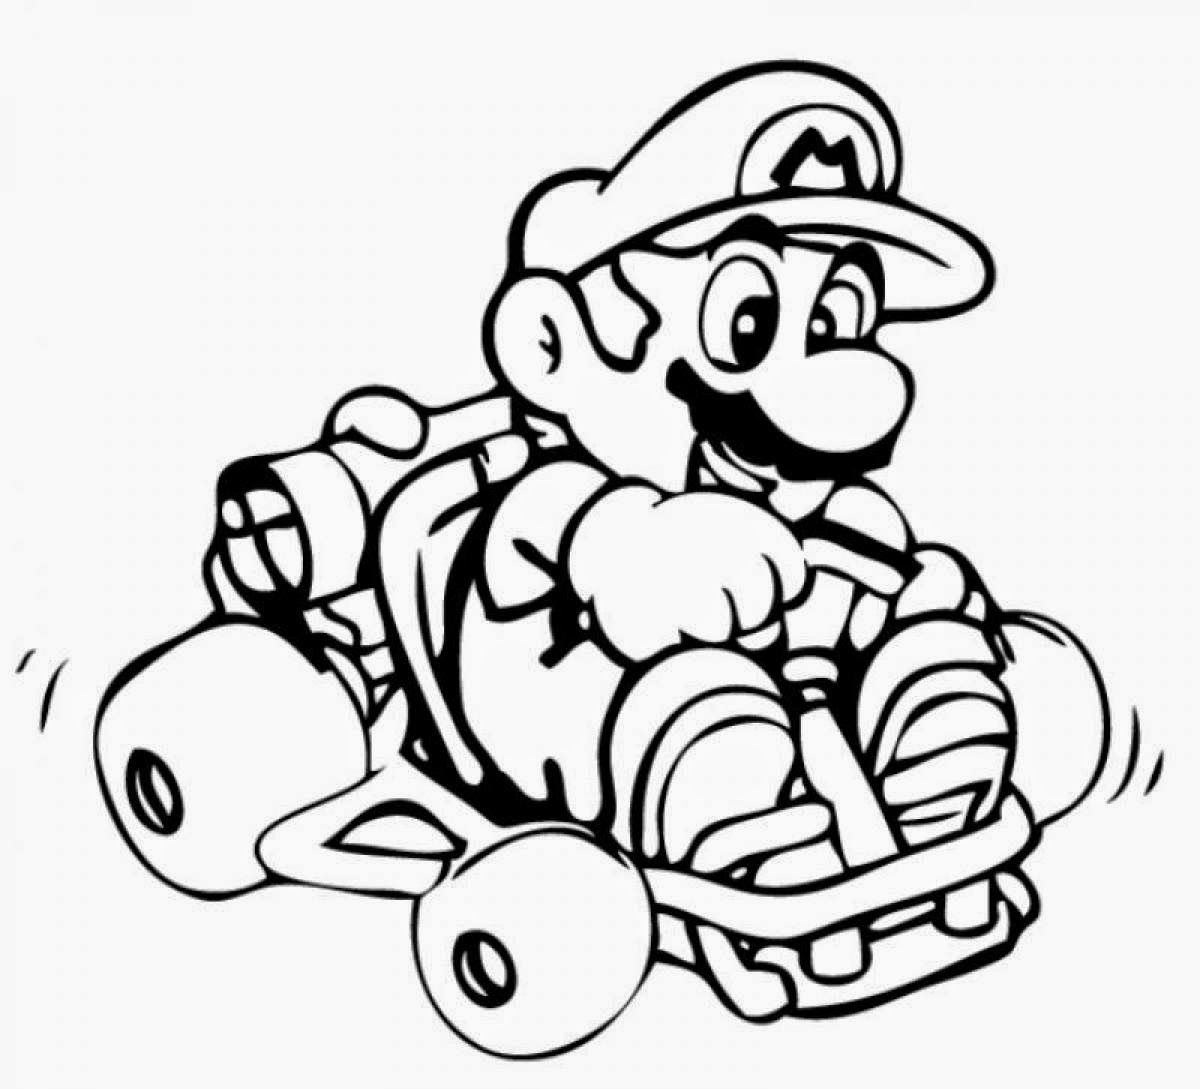 mario-kart-characters-coloring-pages-coloring-home